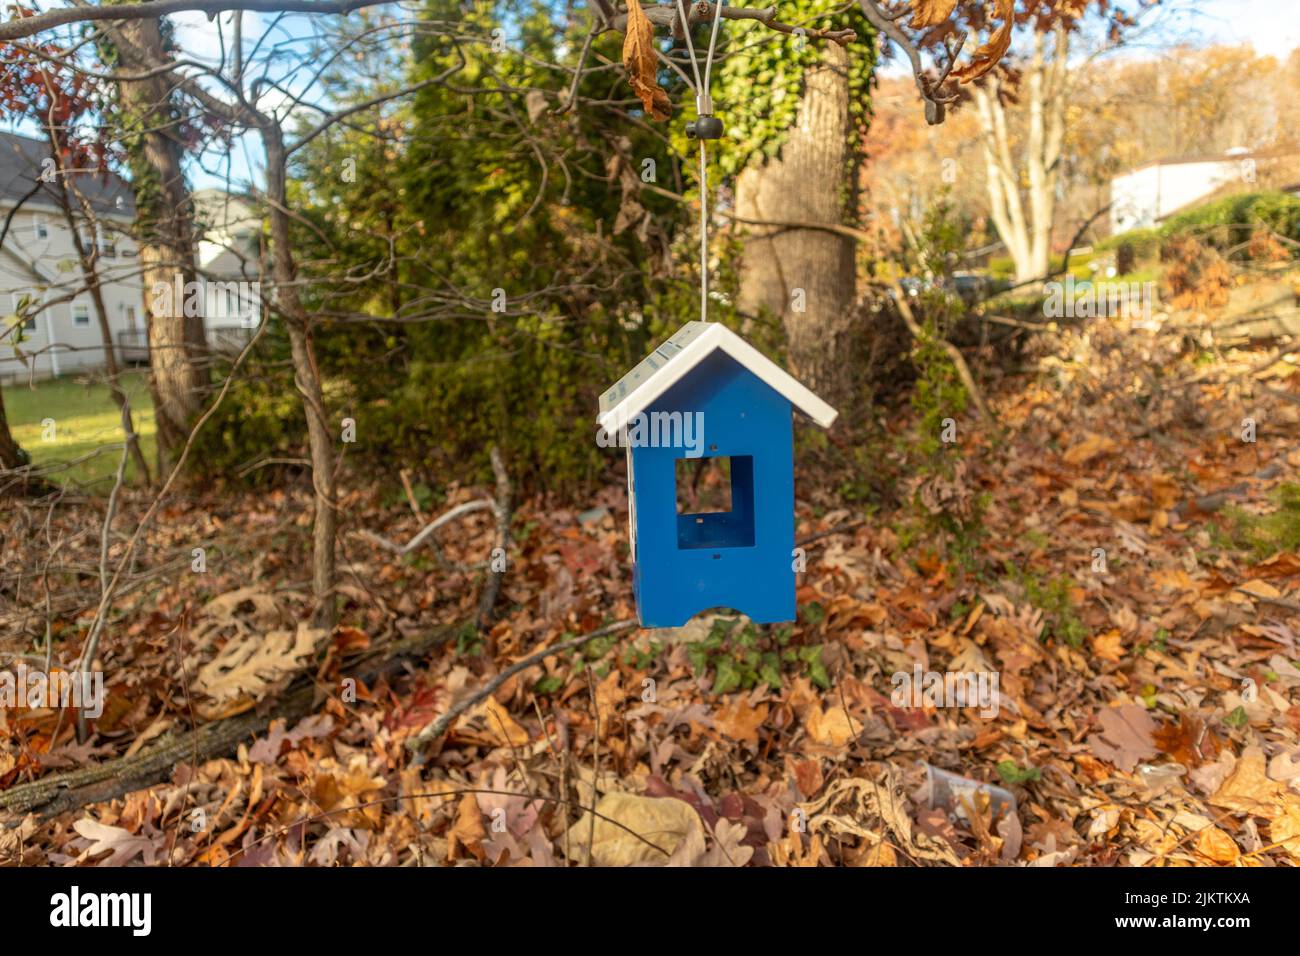 A beautiful shot of a blue wooden dog house in the middle of fallen leaves in a garden on a sunny day Stock Photo